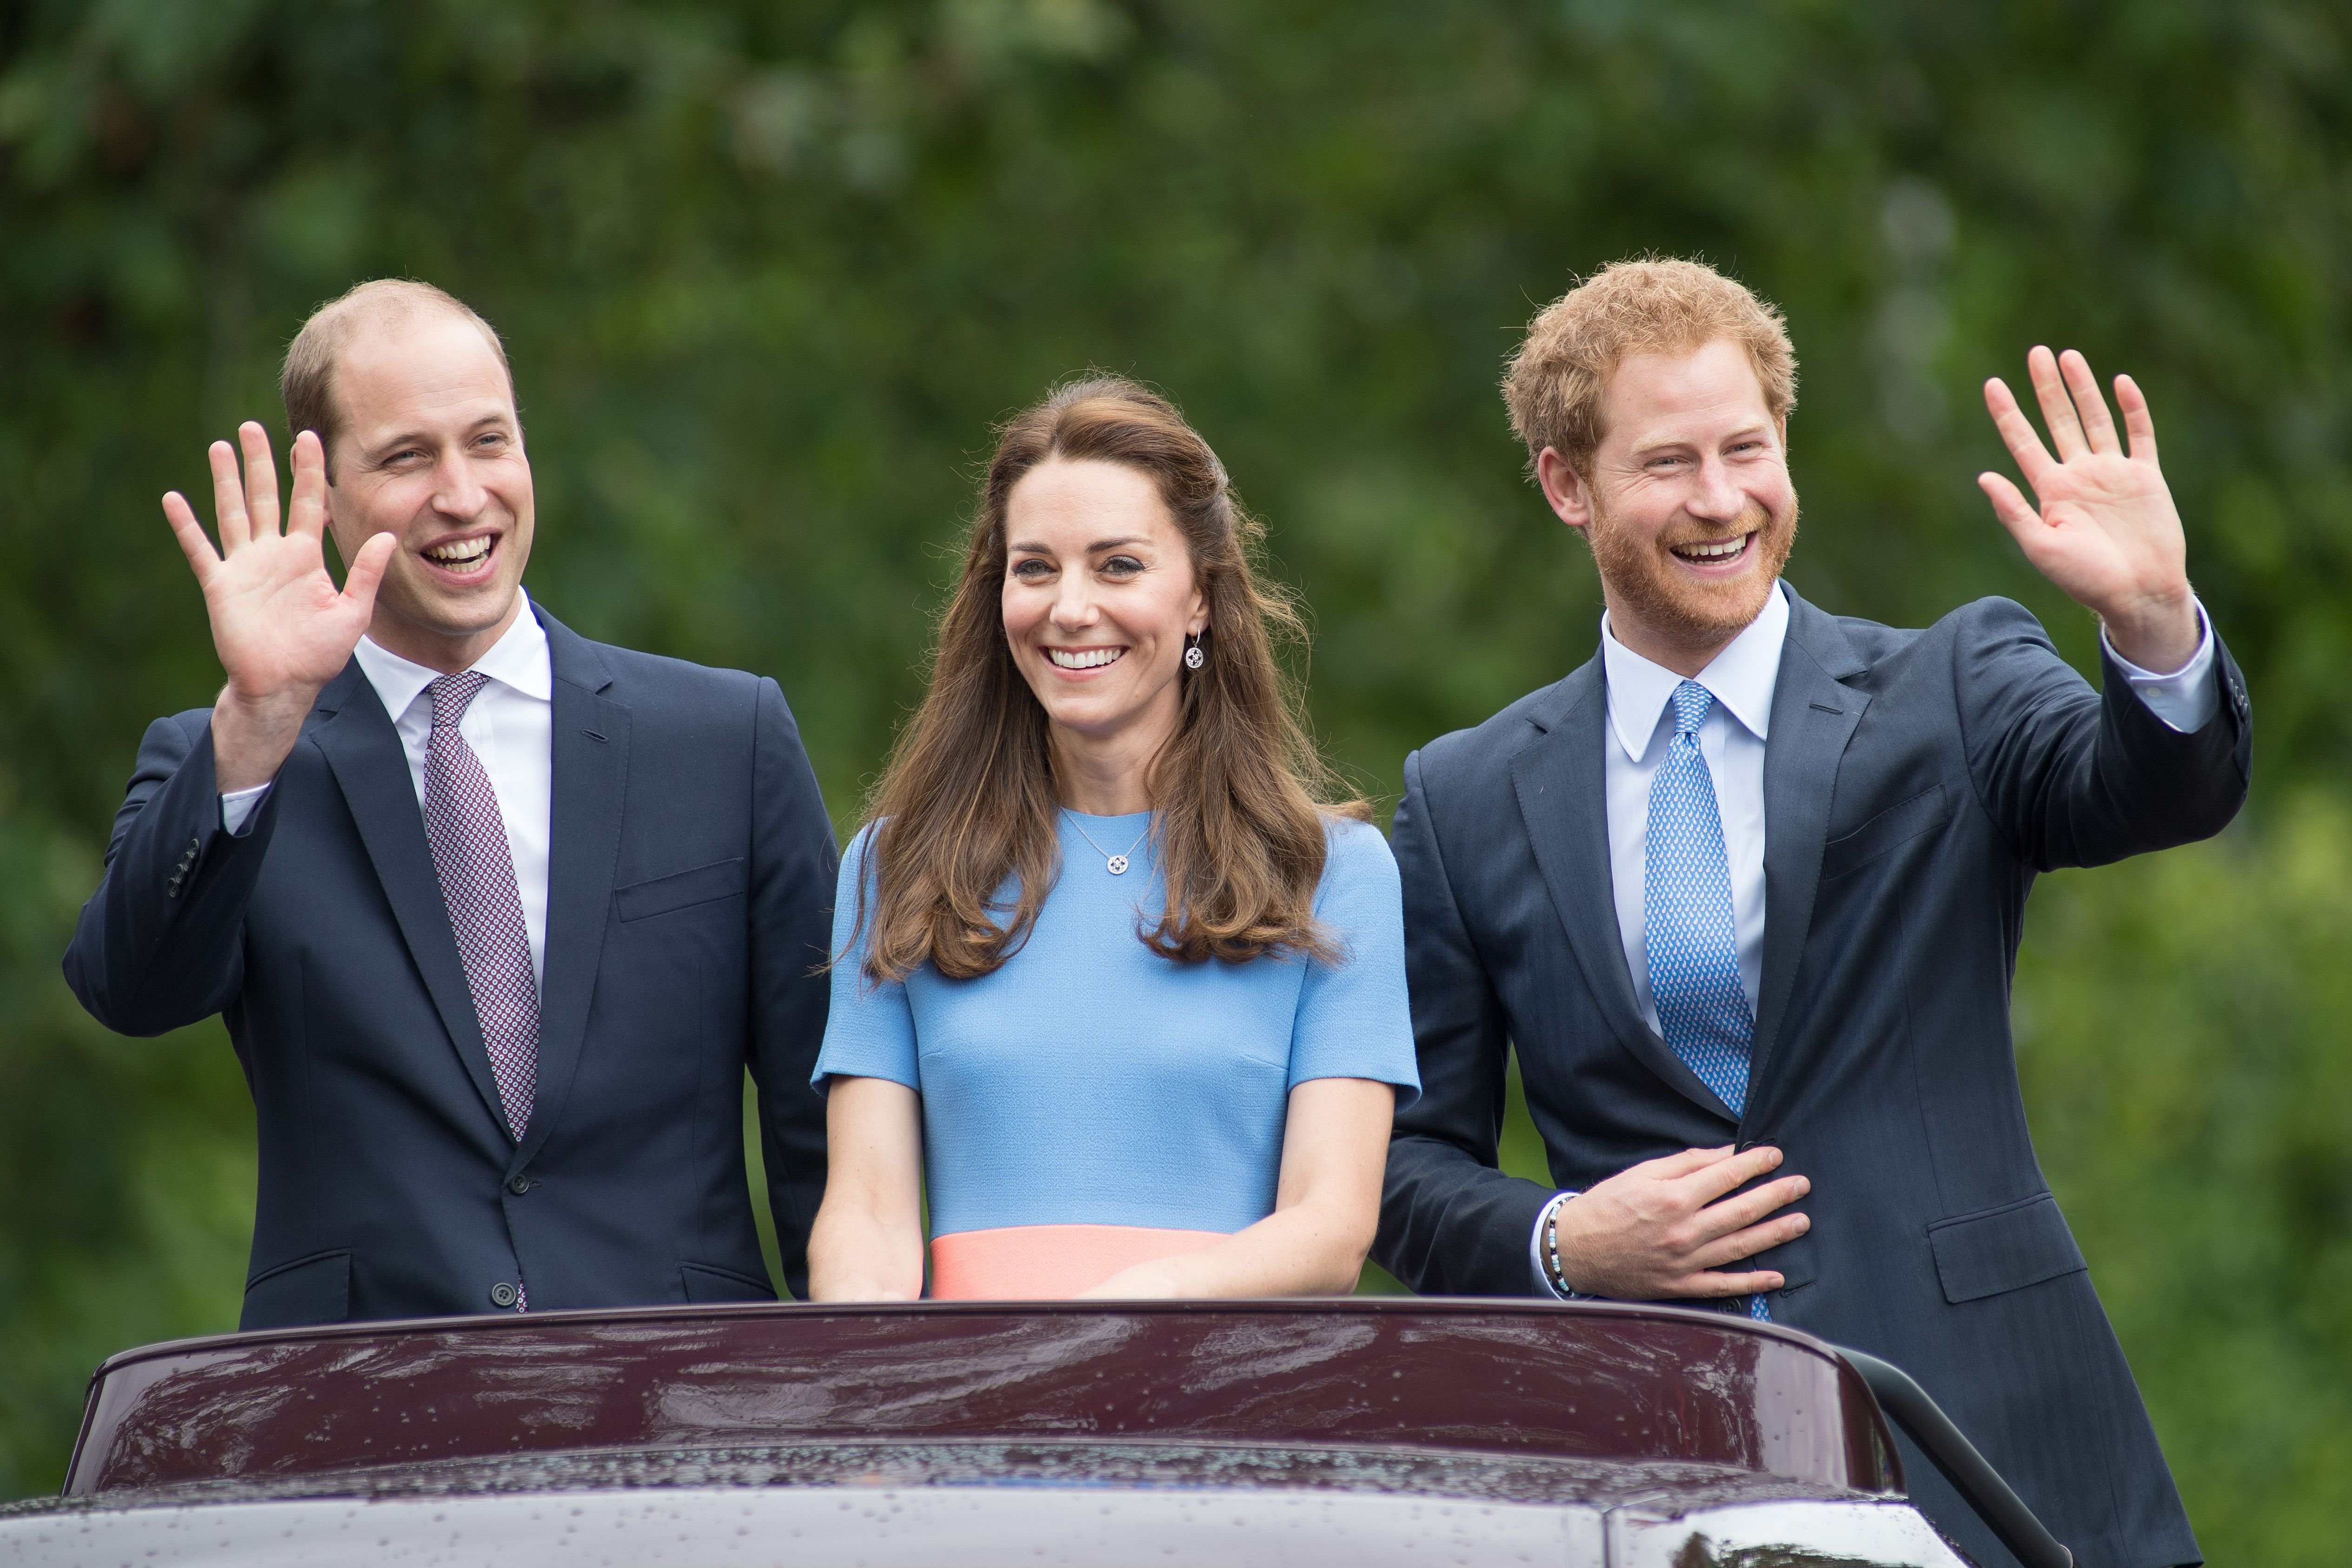 (L-R) Prince William, Duke of Cambridge, Catherine, Duchess of Cambridge and Prince Harry during "The Patron's Lunch" celebrations for The Queen's 90th birthday at The Mall on June 12, 2016 in London, England. | Source: Getty Images